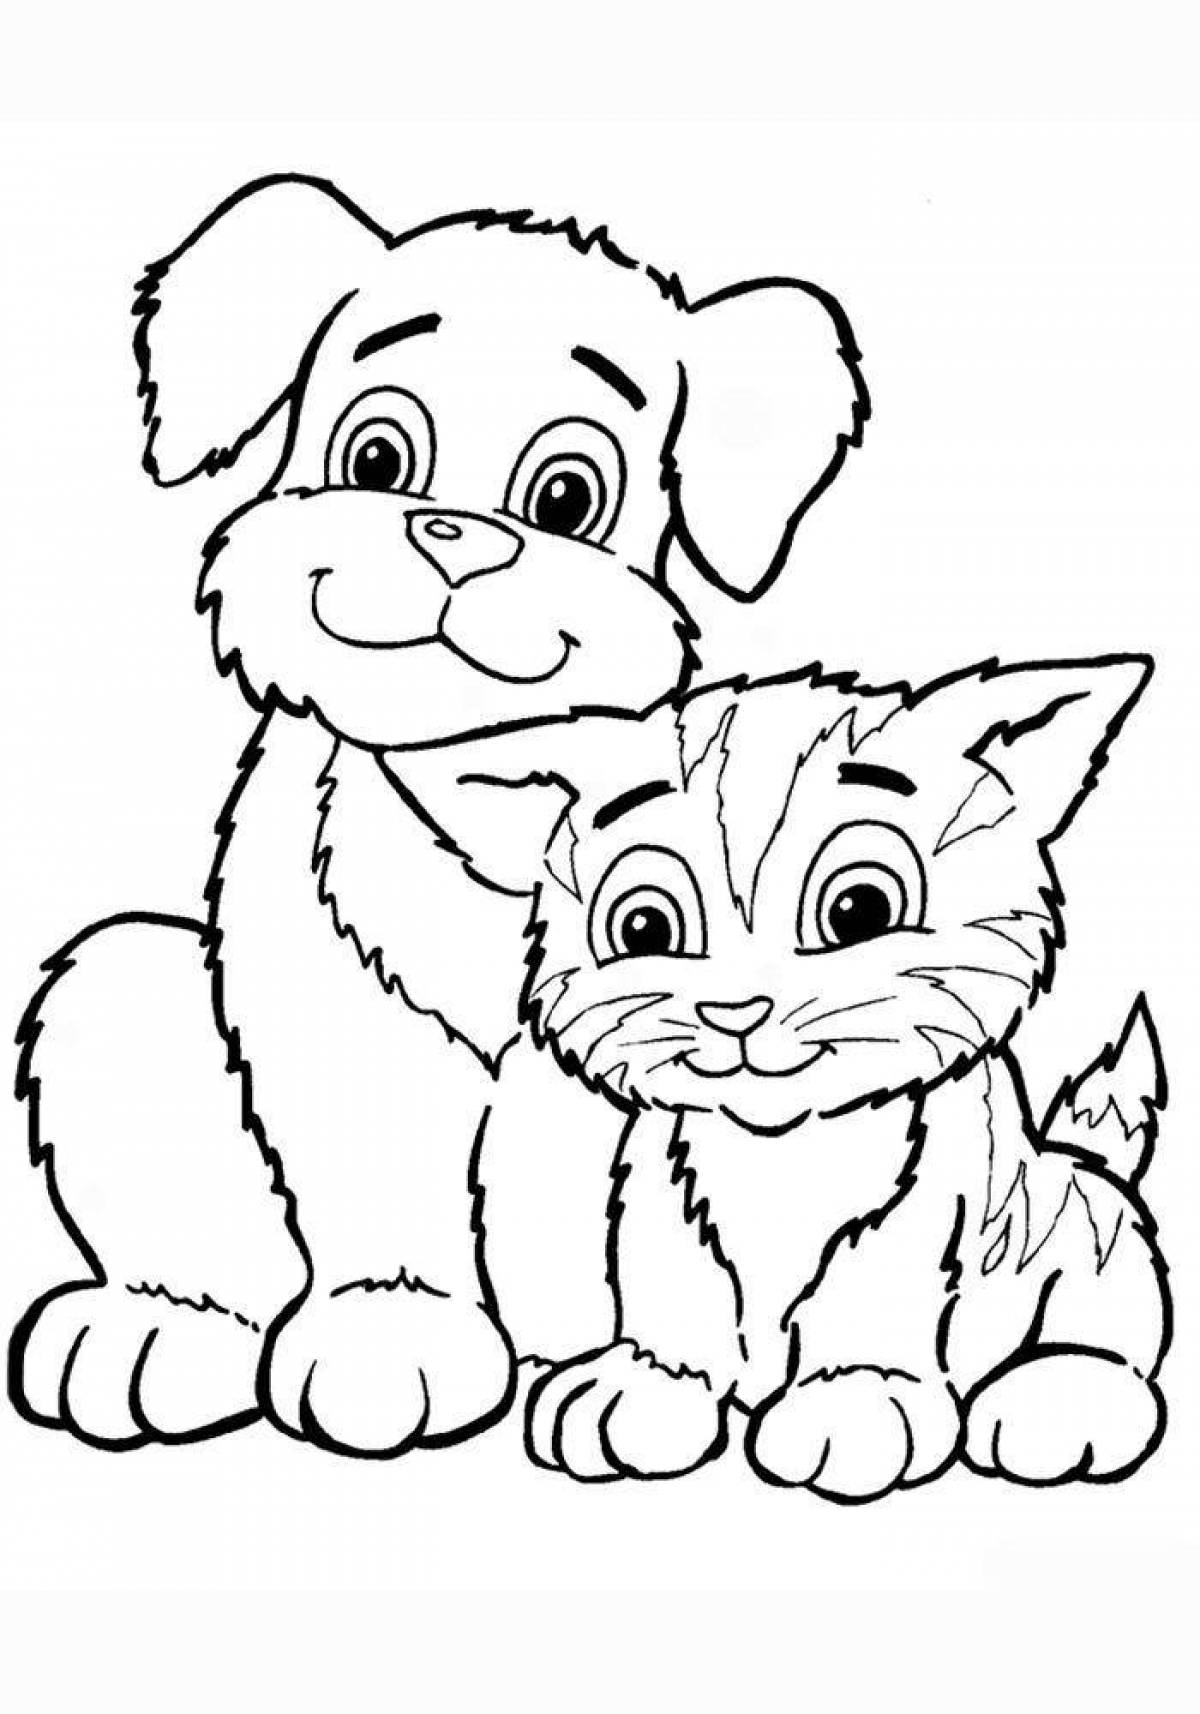 Cat and dog #6